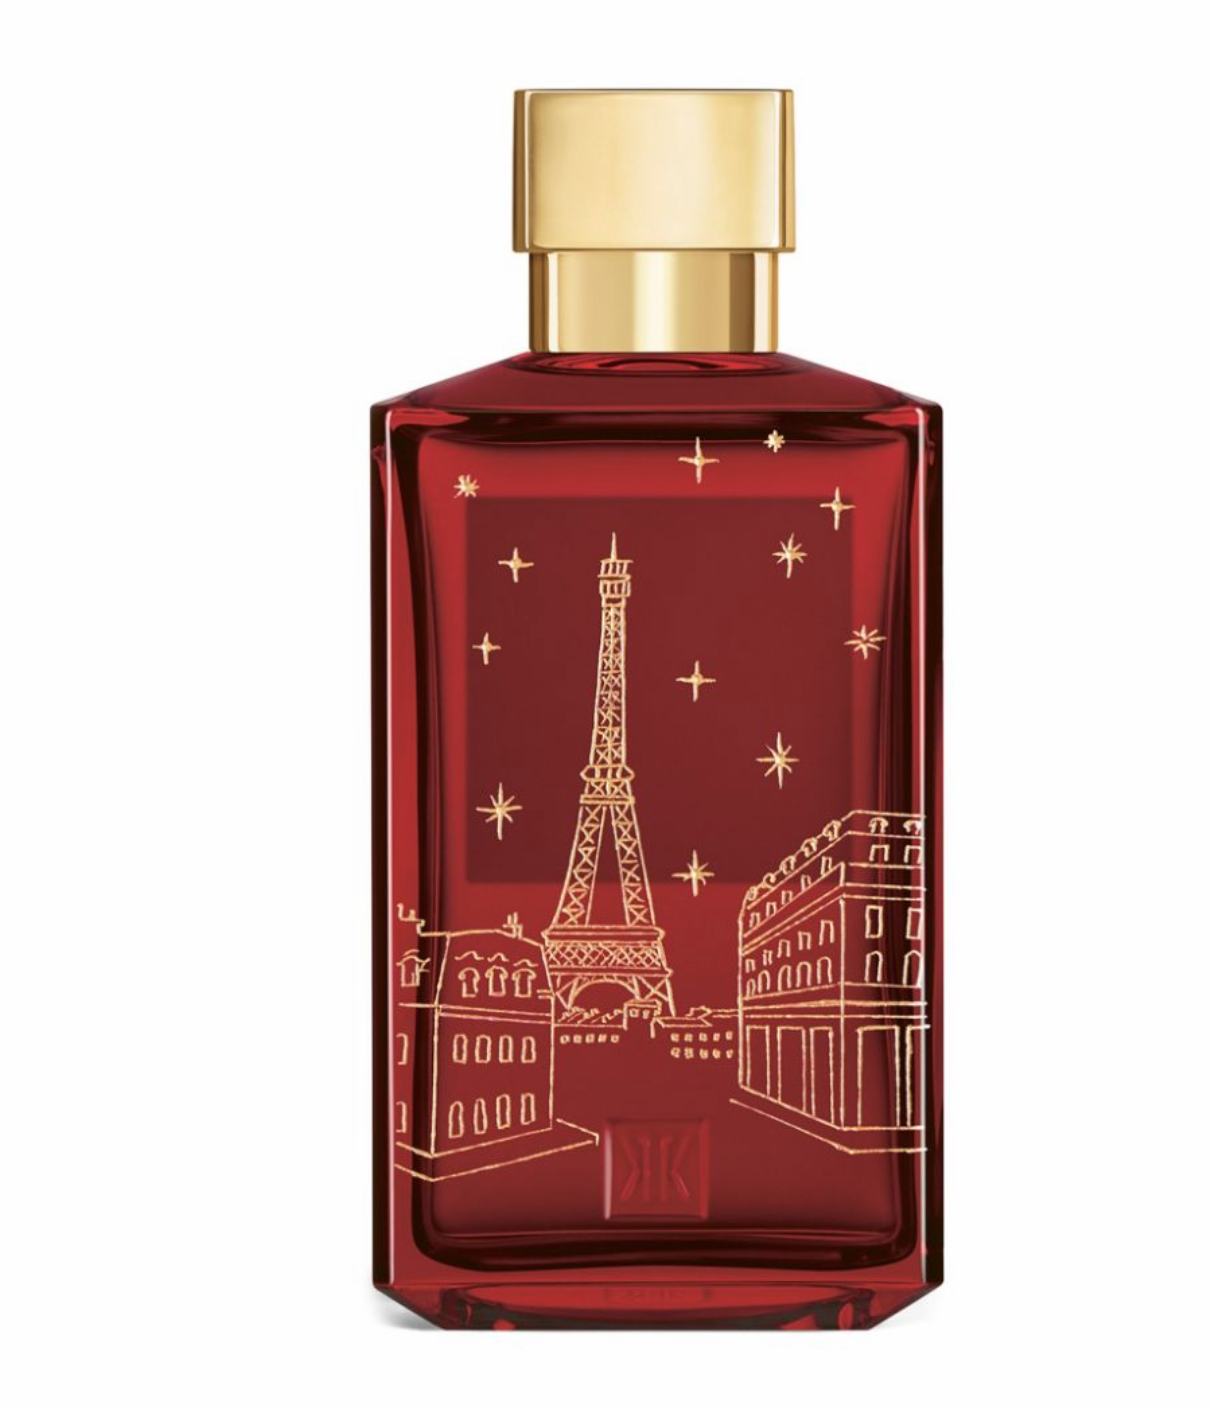 Limited edition signature wedding day scent, Baccarat Rouge 540 available at Harrods.